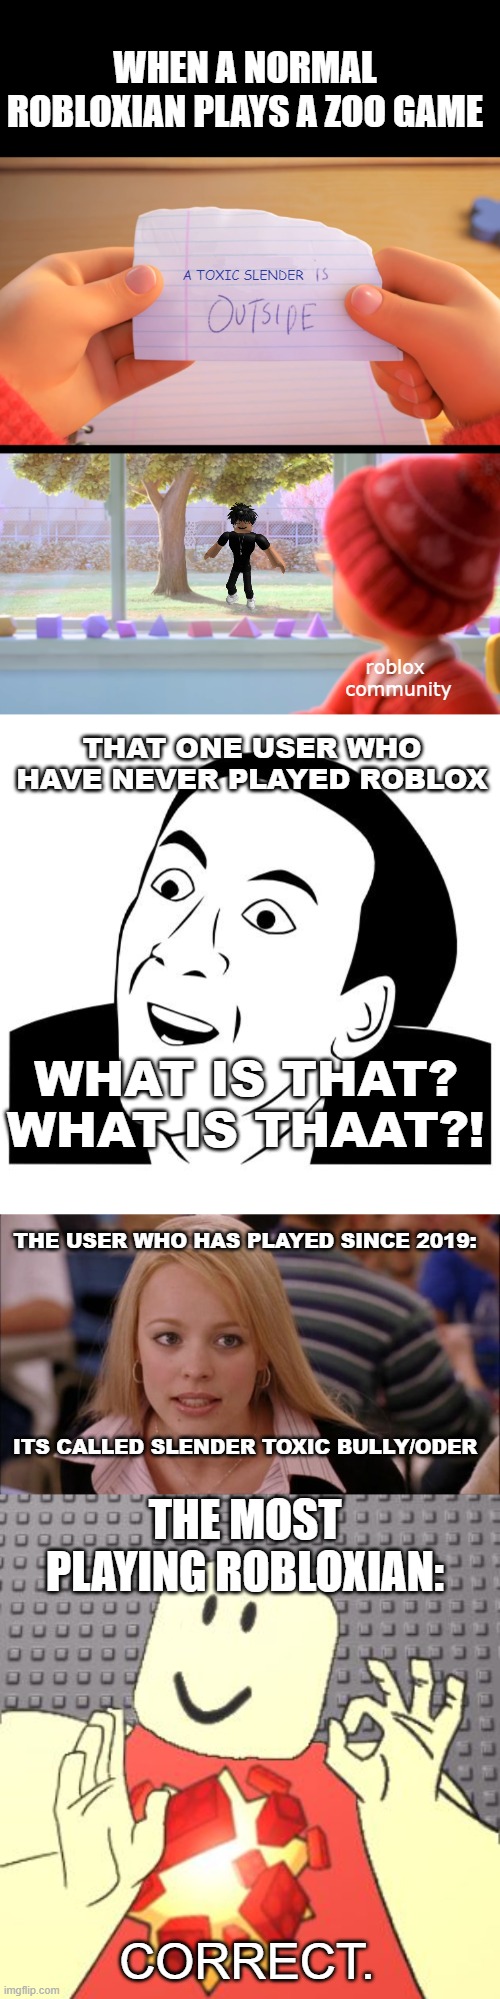 longest meme yet | WHEN A NORMAL ROBLOXIAN PLAYS A ZOO GAME; A TOXIC SLENDER; roblox 
community; THAT ONE USER WHO HAVE NEVER PLAYED ROBLOX; WHAT IS THAT? WHAT IS THAAT?! THE USER WHO HAS PLAYED SINCE 2019:; ITS CALLED SLENDER TOXIC BULLY/ODER; THE MOST PLAYING ROBLOXIAN:; CORRECT. | image tagged in x is outside,you don't say,memes,its not going to happen,just right robloxian | made w/ Imgflip meme maker